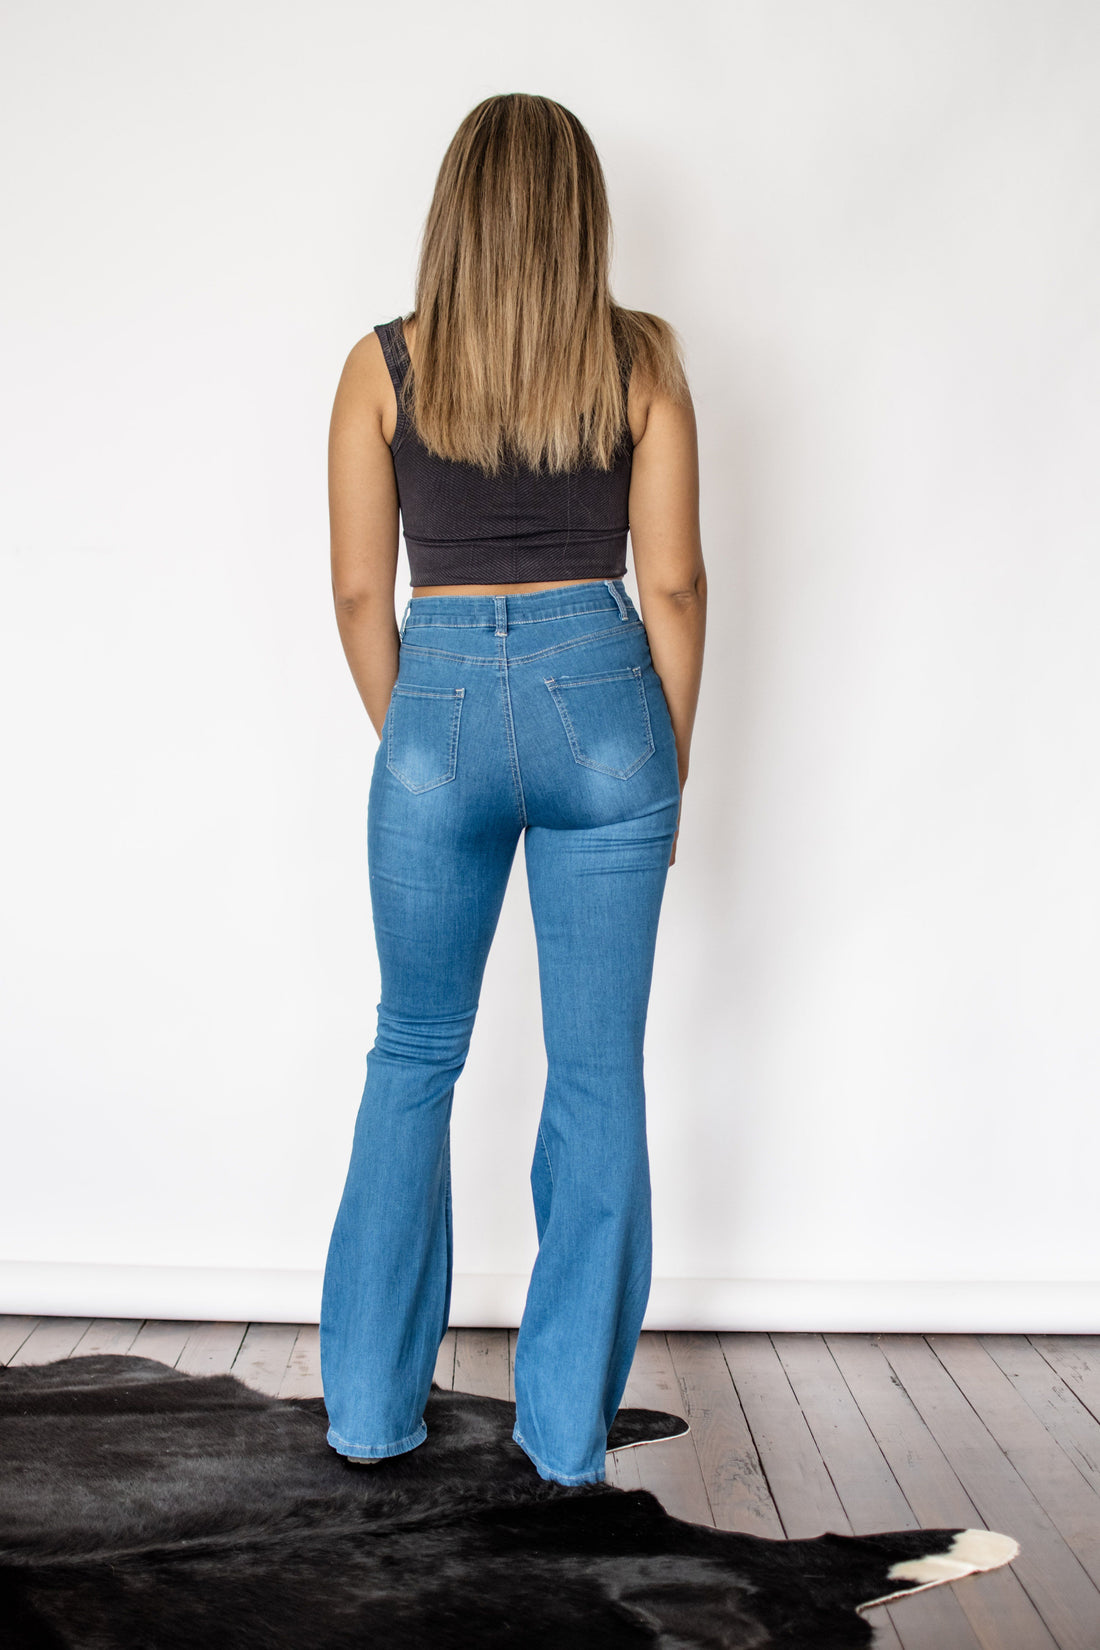 All The Views Flare Jeans - Medium Wash